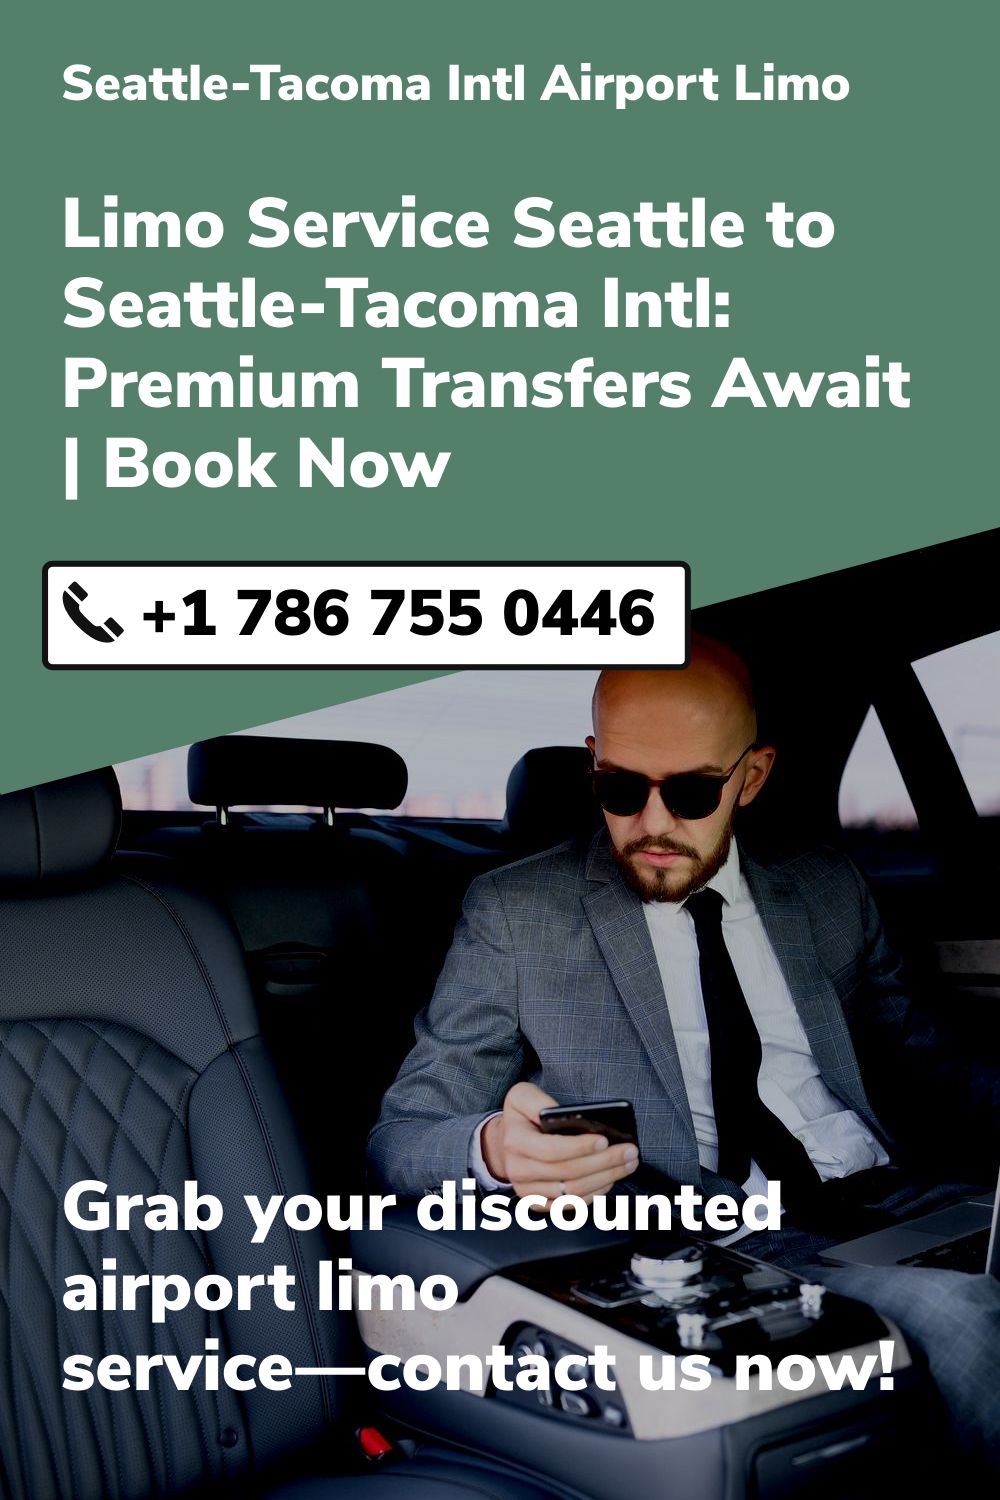 Seattle-Tacoma Intl Airport Limo